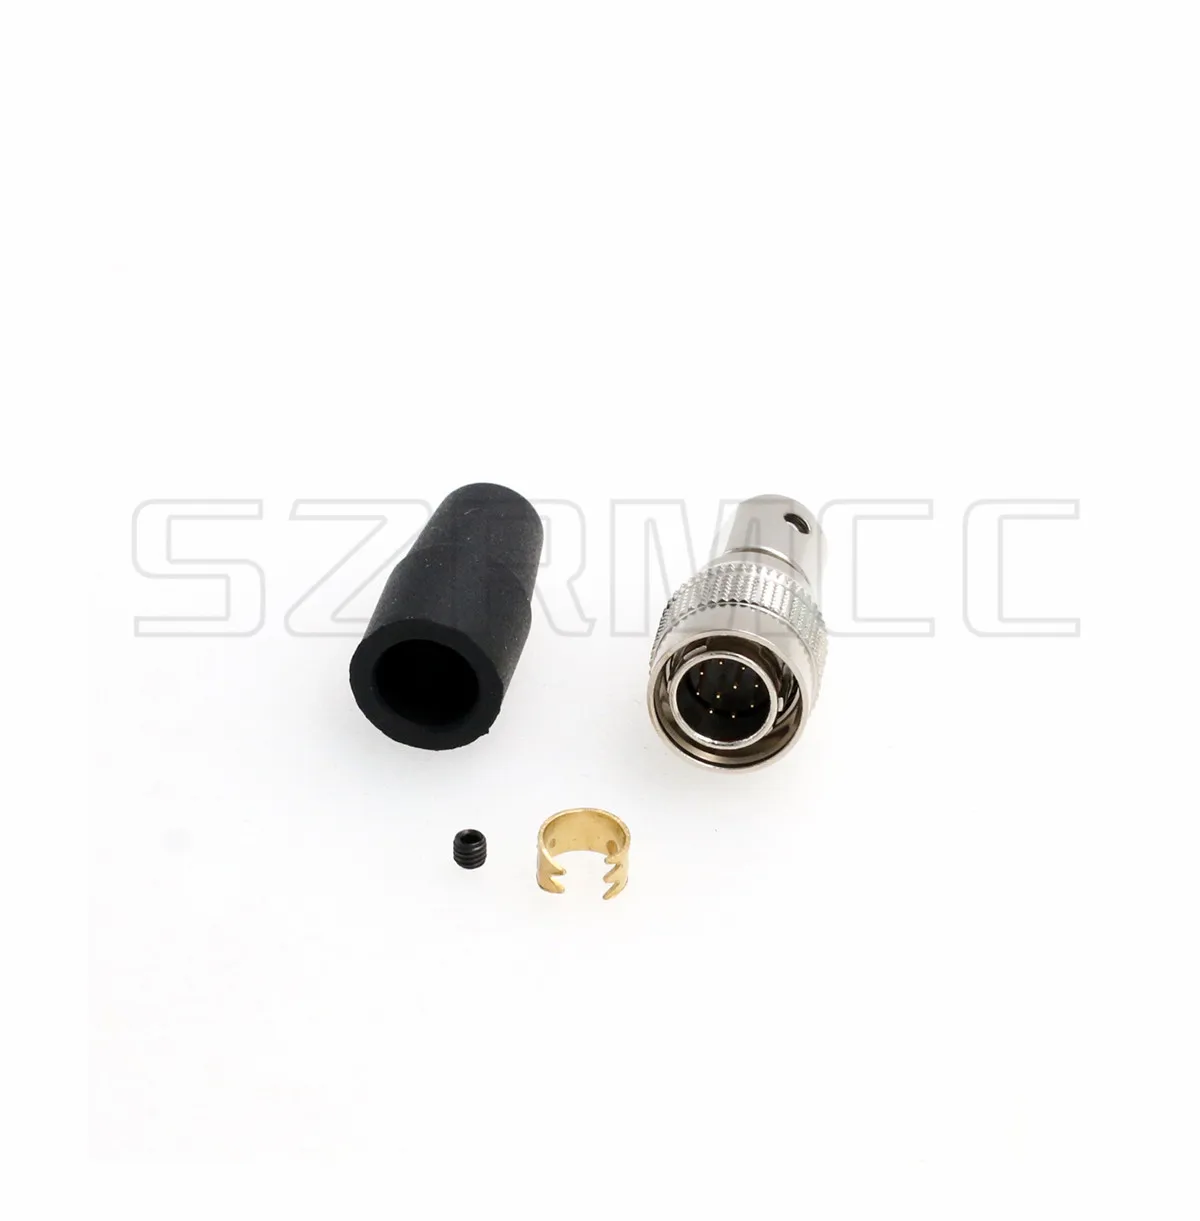 

HR10A-10P-10P Hirose 10 Pin Male Push-Pull Self-Locking Connector Plug for Industrial Camera